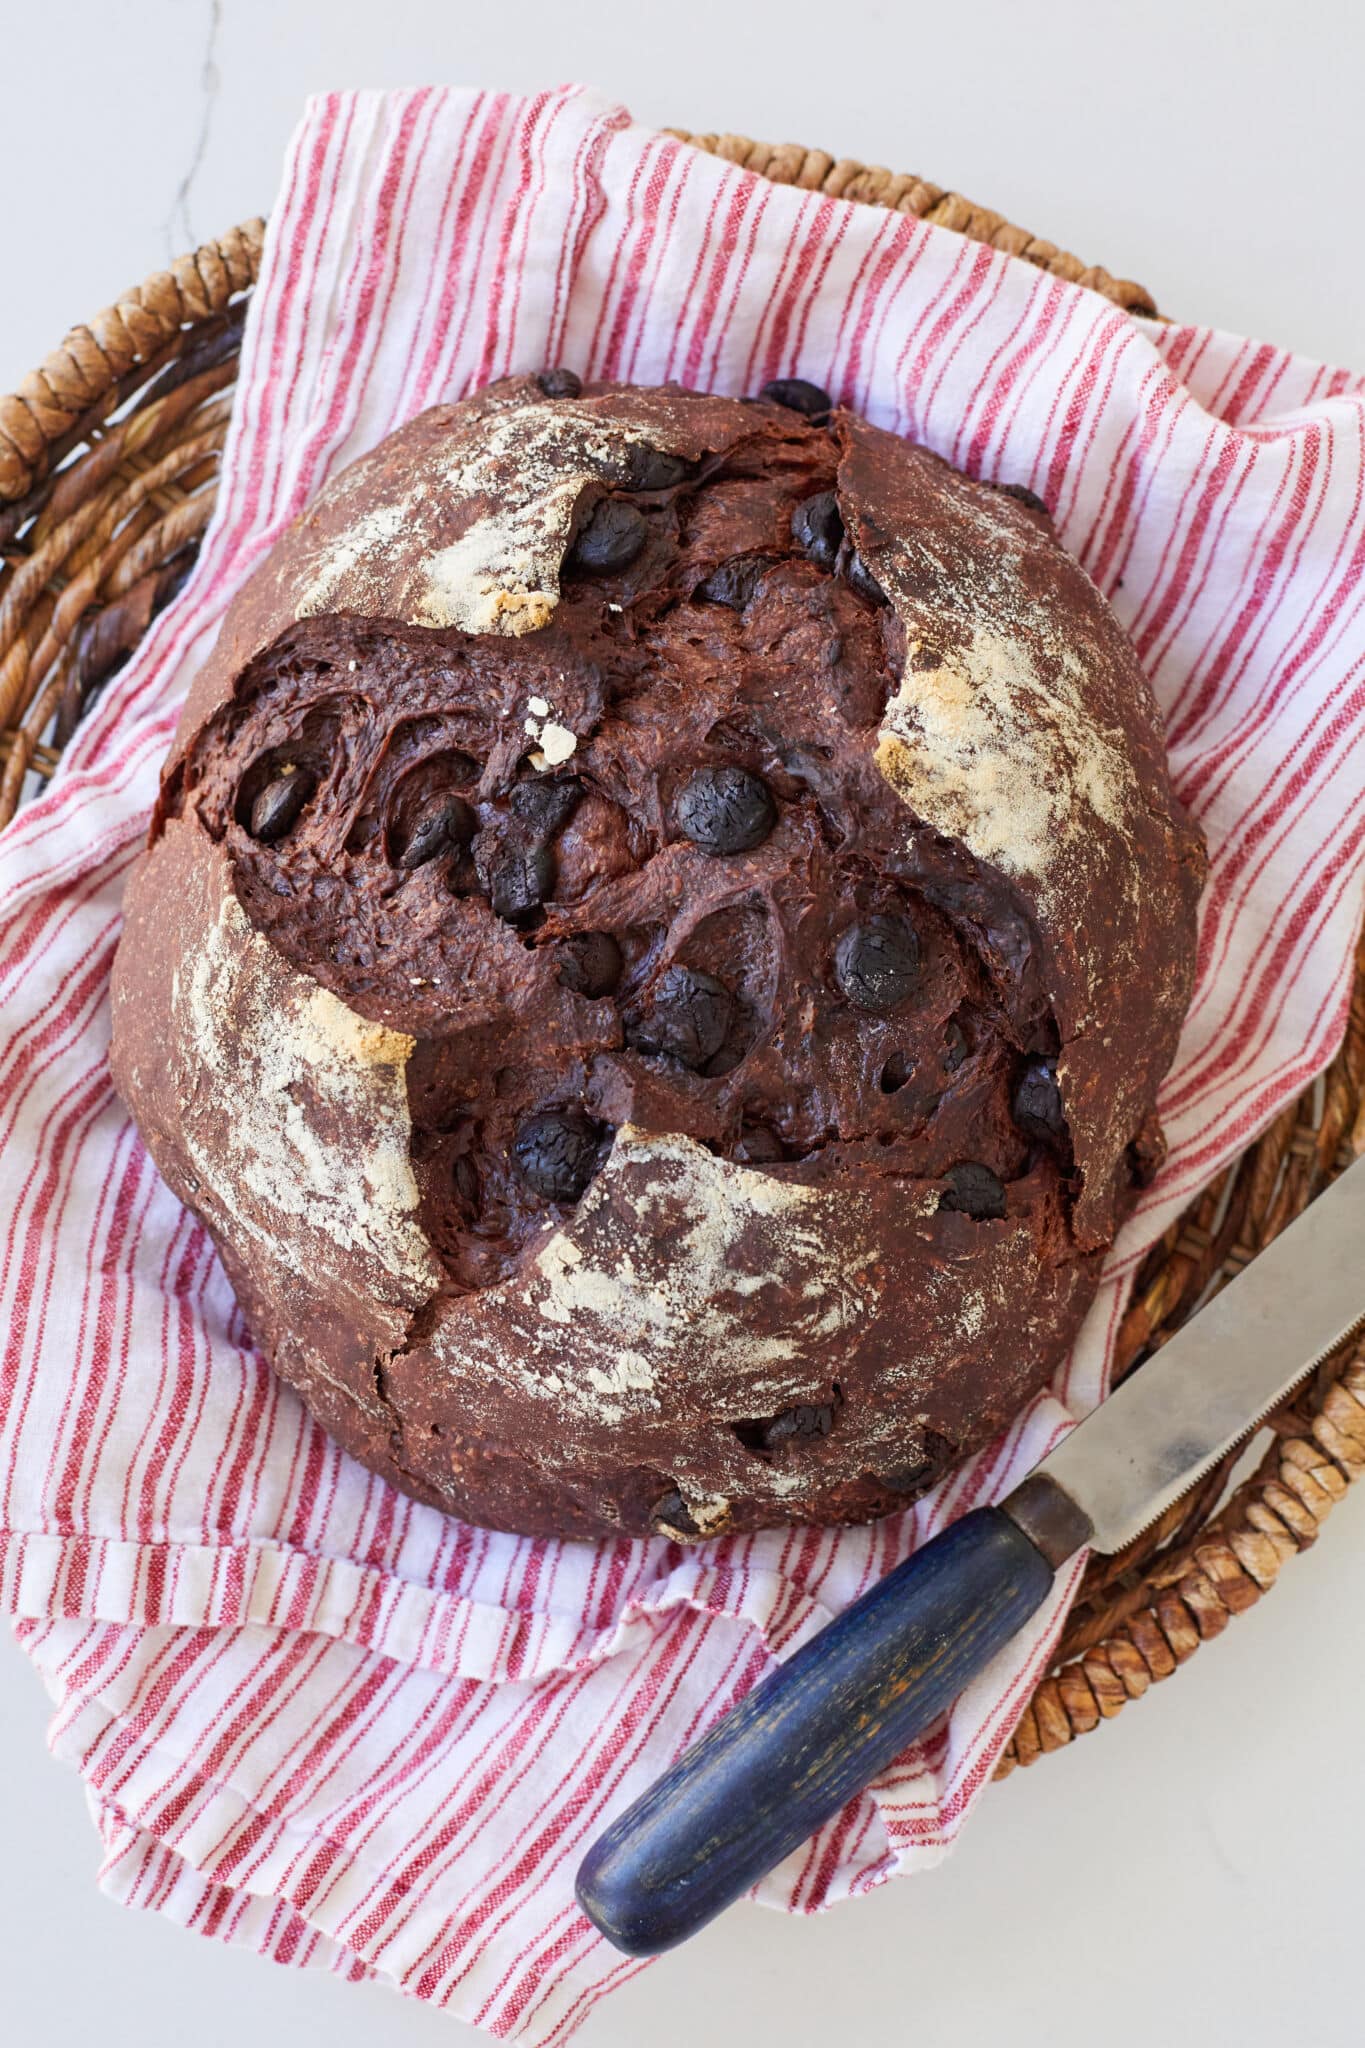 A loaf of Chocolate Bread is on a kitchen towel in a bread basket with a bread knife. It's a dark-chocolate color loaf with crispy crust and a cross score on top, loaded with chocolate chips. The inner crumb looks very bubbly.